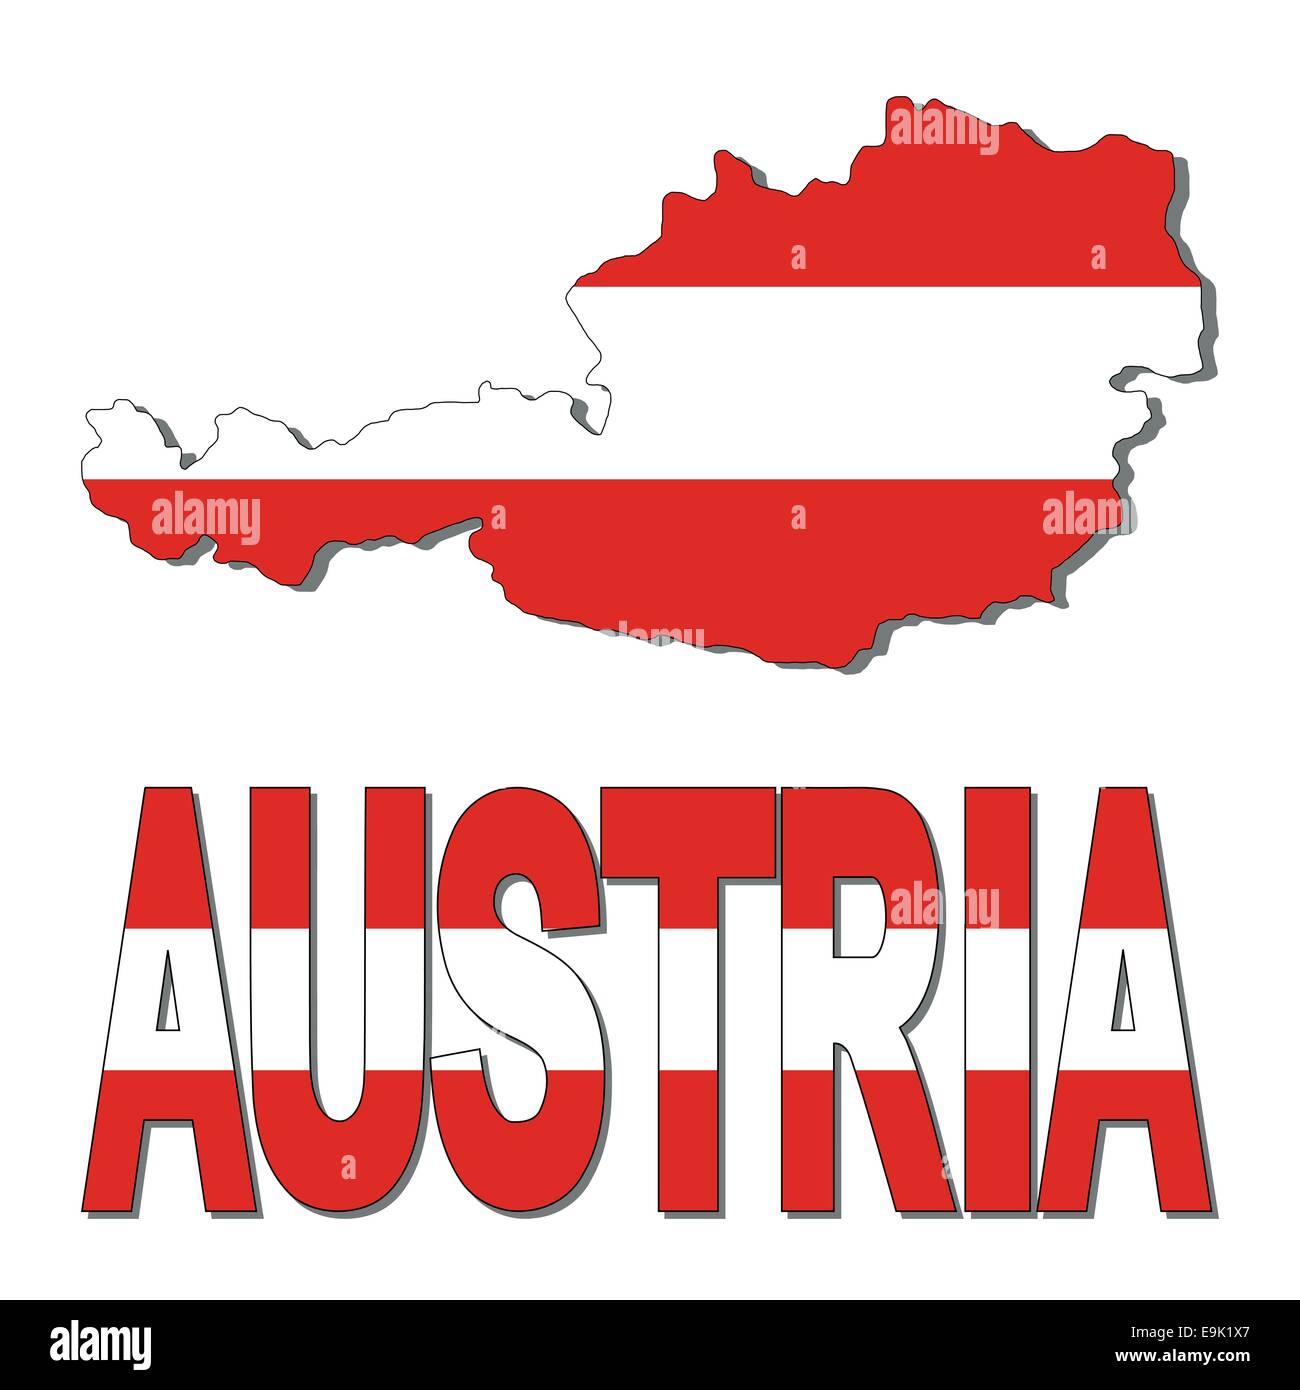 Austria map flag and text illustration Stock Vector